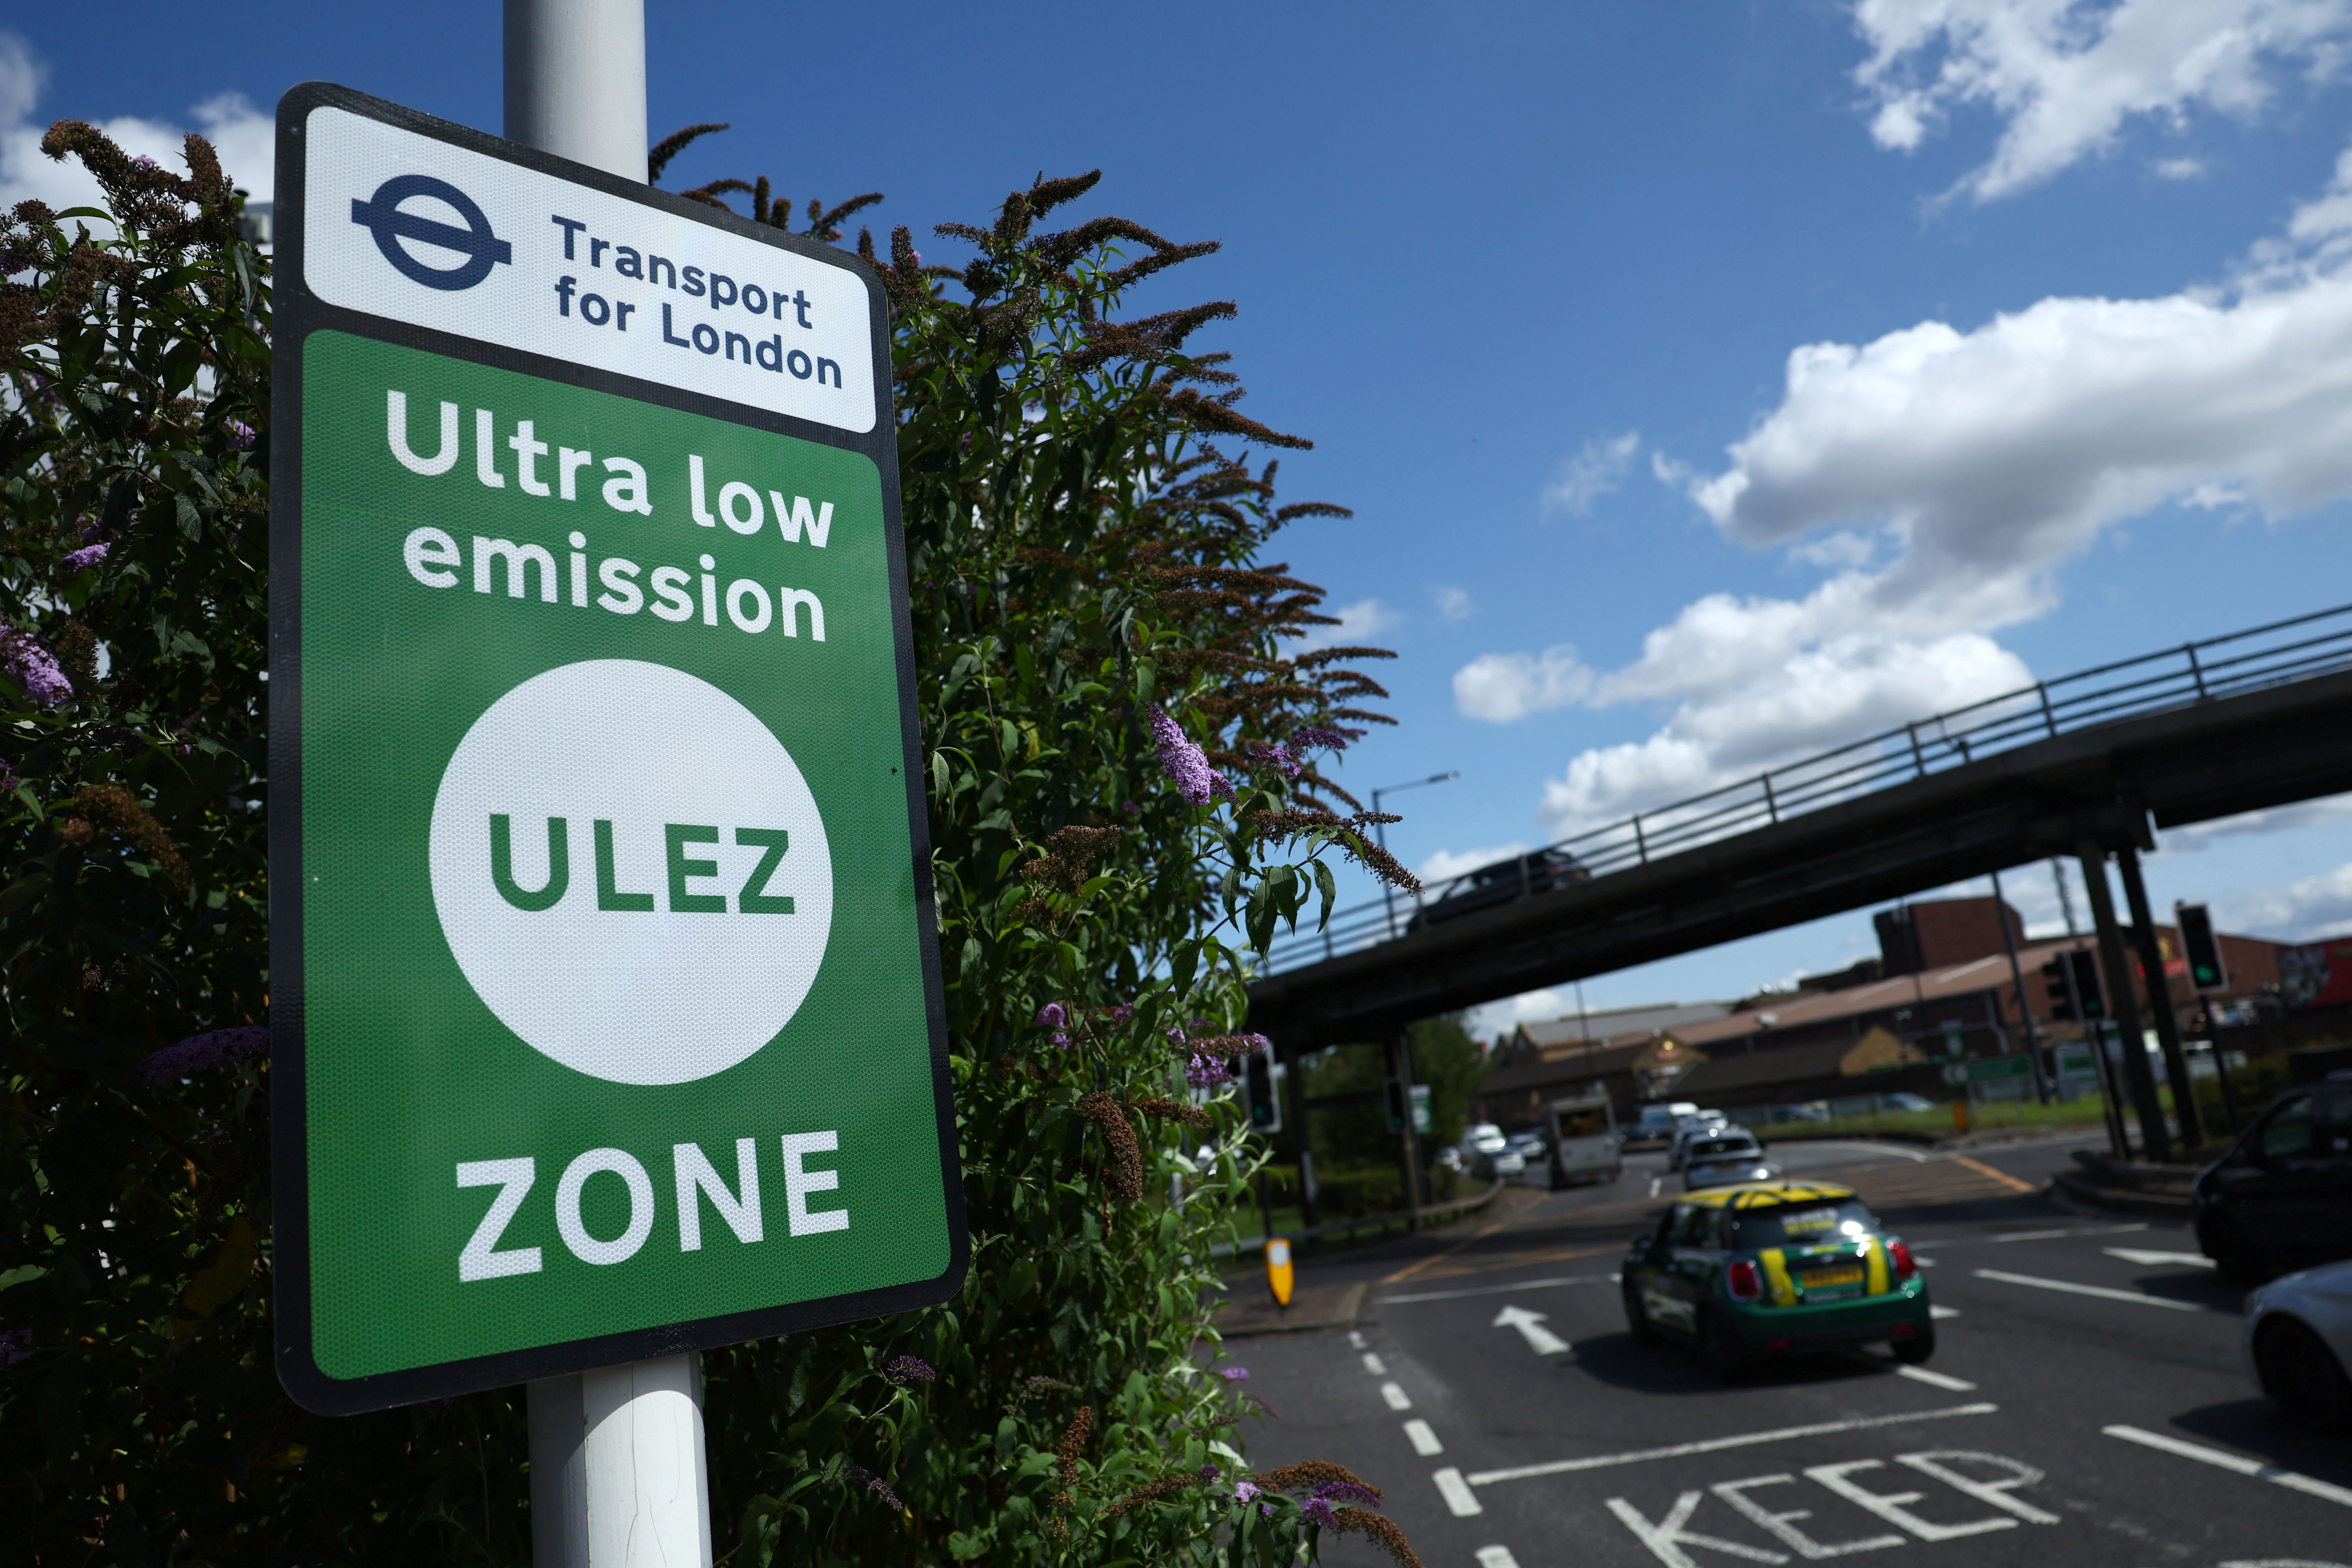 Signage along existing boundary of London's Ultra Low Emissions Zone (ULEZ) zone ahead of proposed upcoming expansion, in London